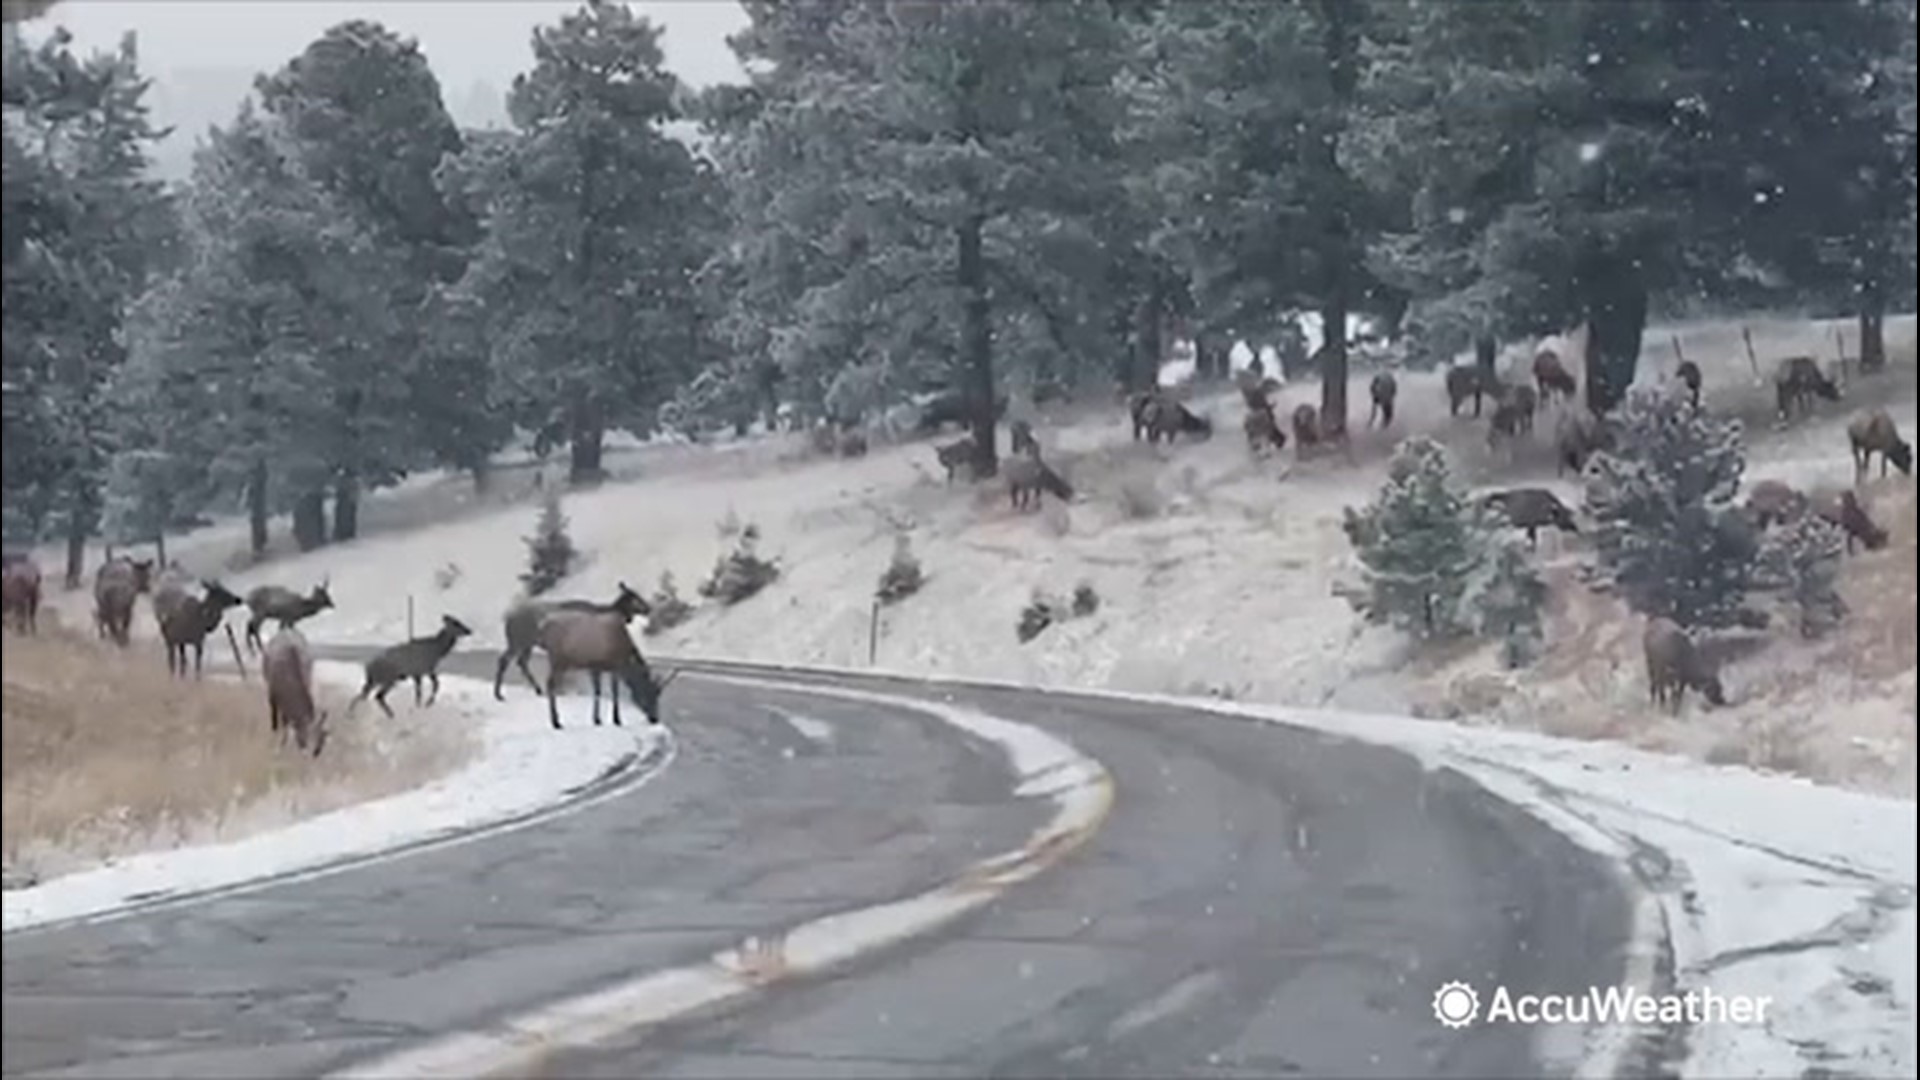 On Oct. 25, a large herd of elk were seen grazing on hills near Genesee, Colorado, that were covered by the recent snowstorm.